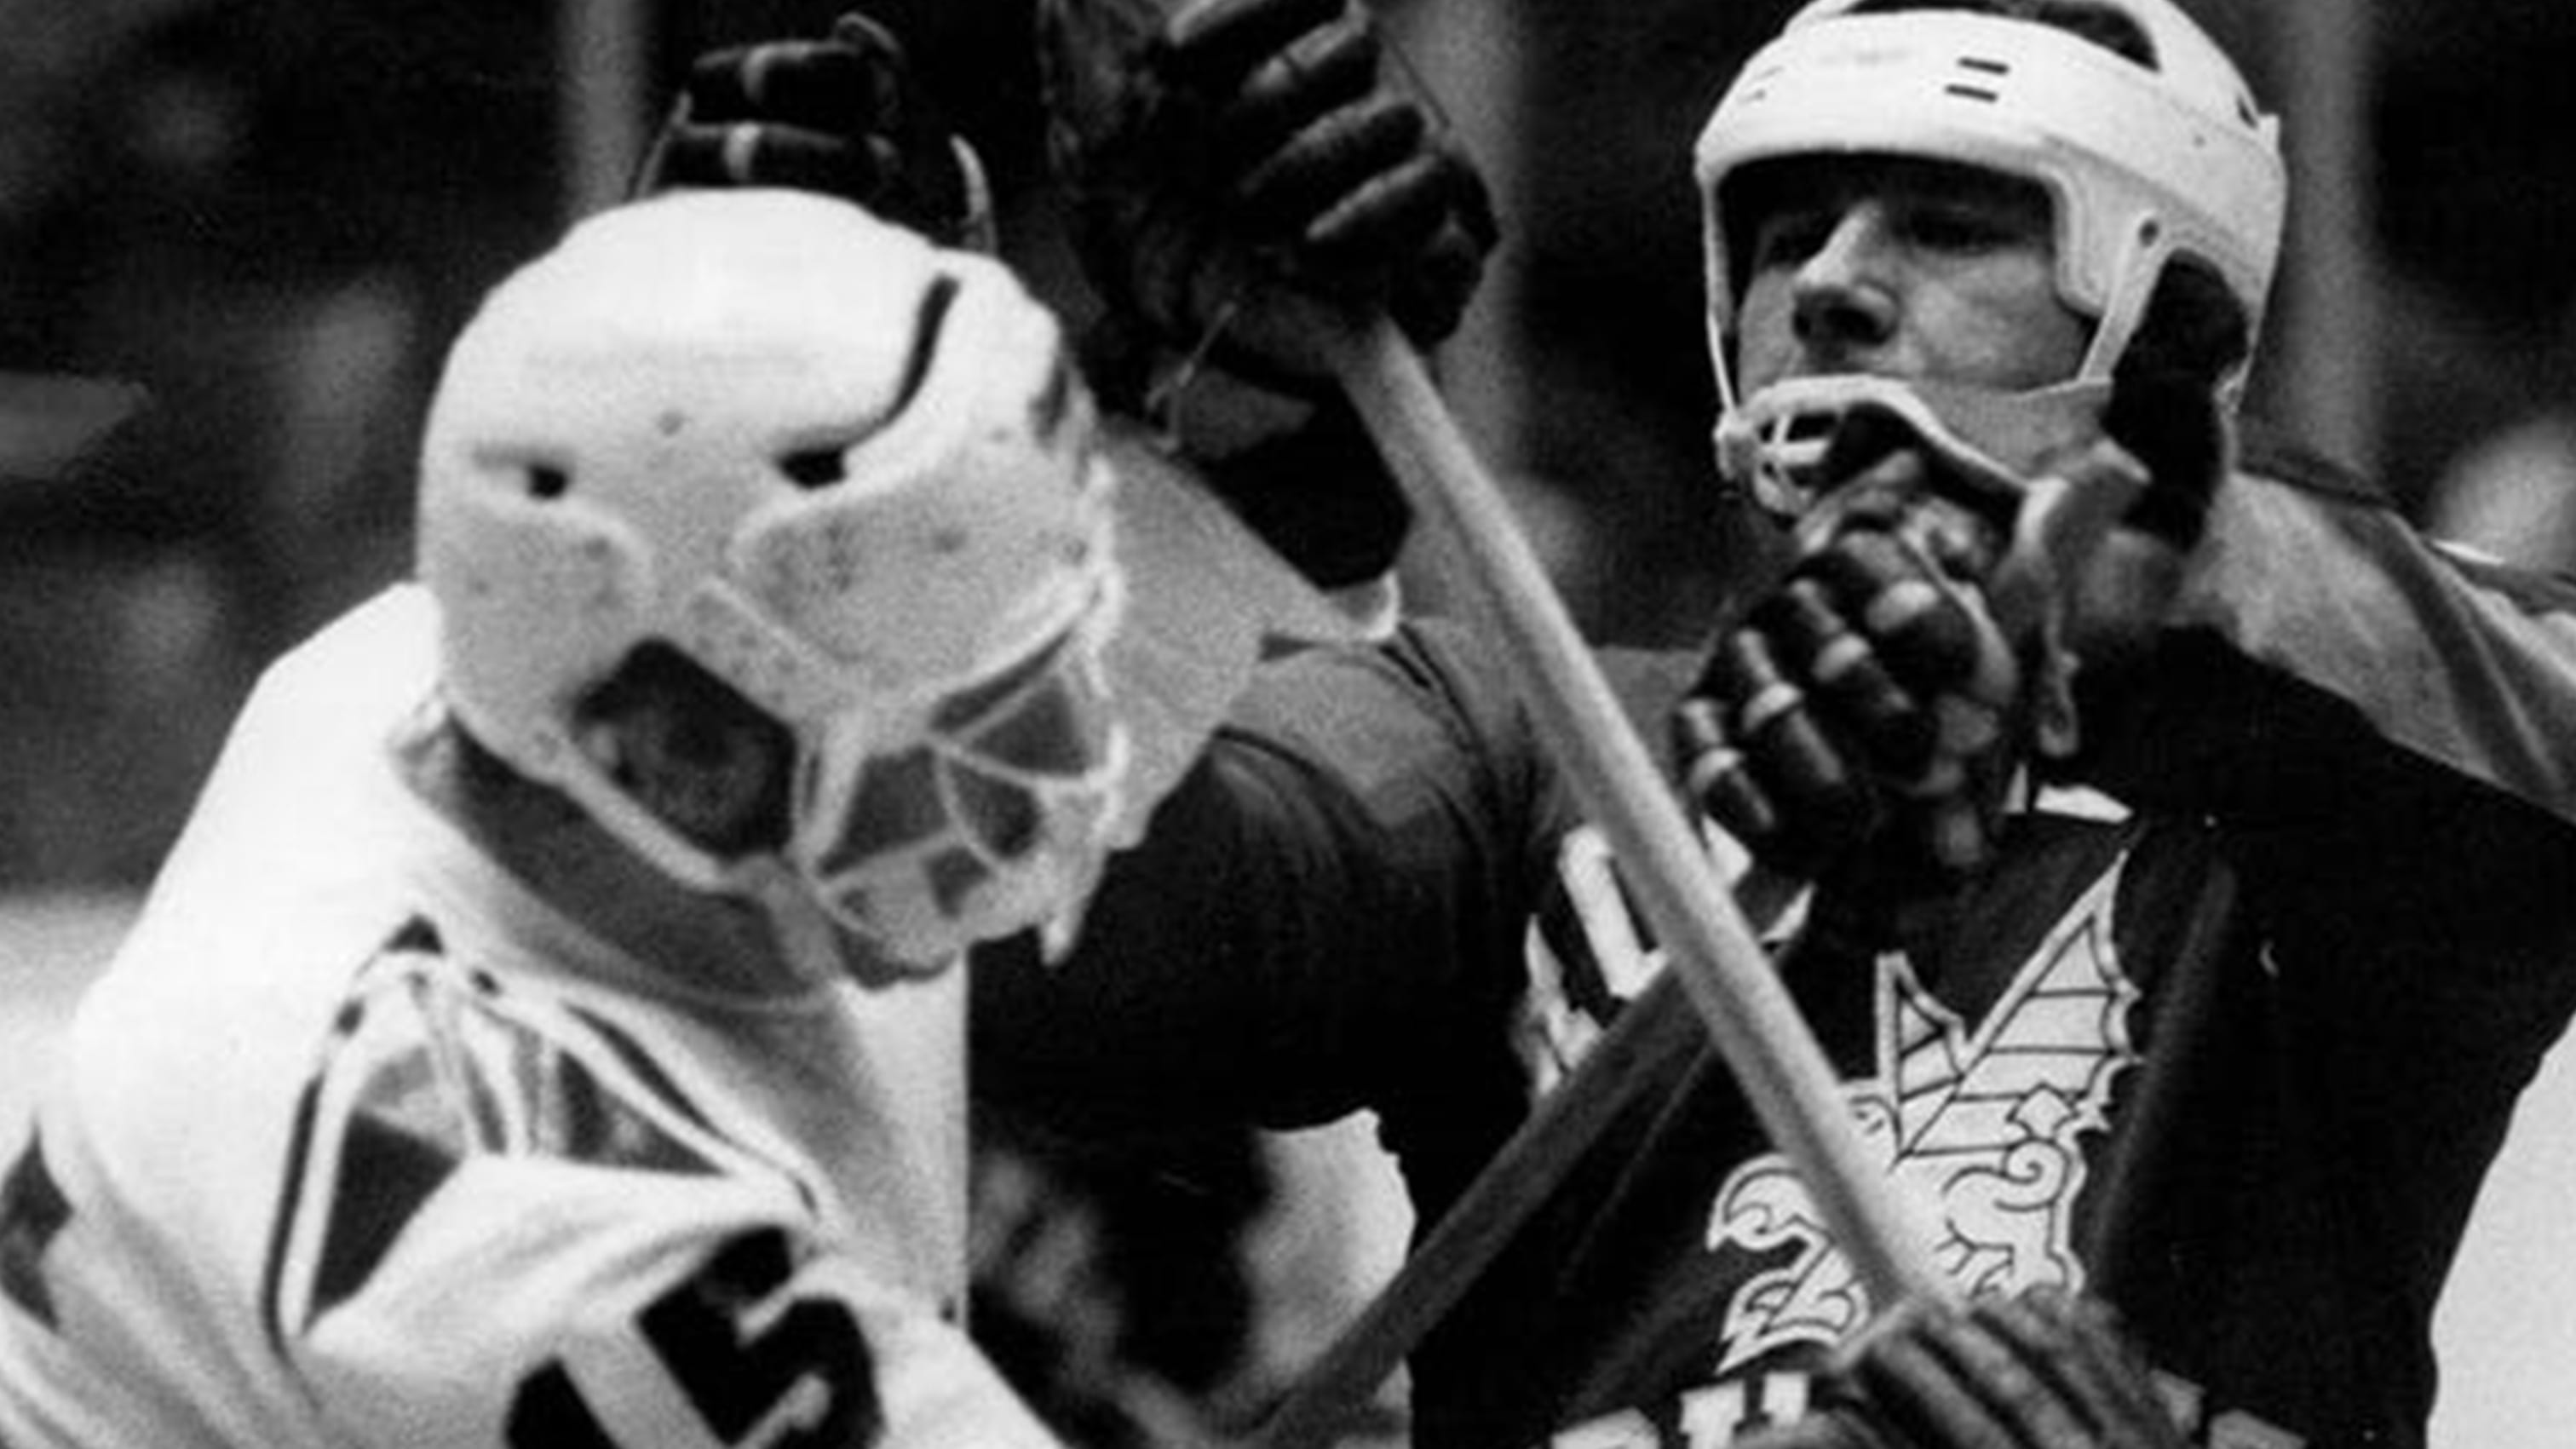 Rochester Griffins - Forgotten Teams of Lacrosse History